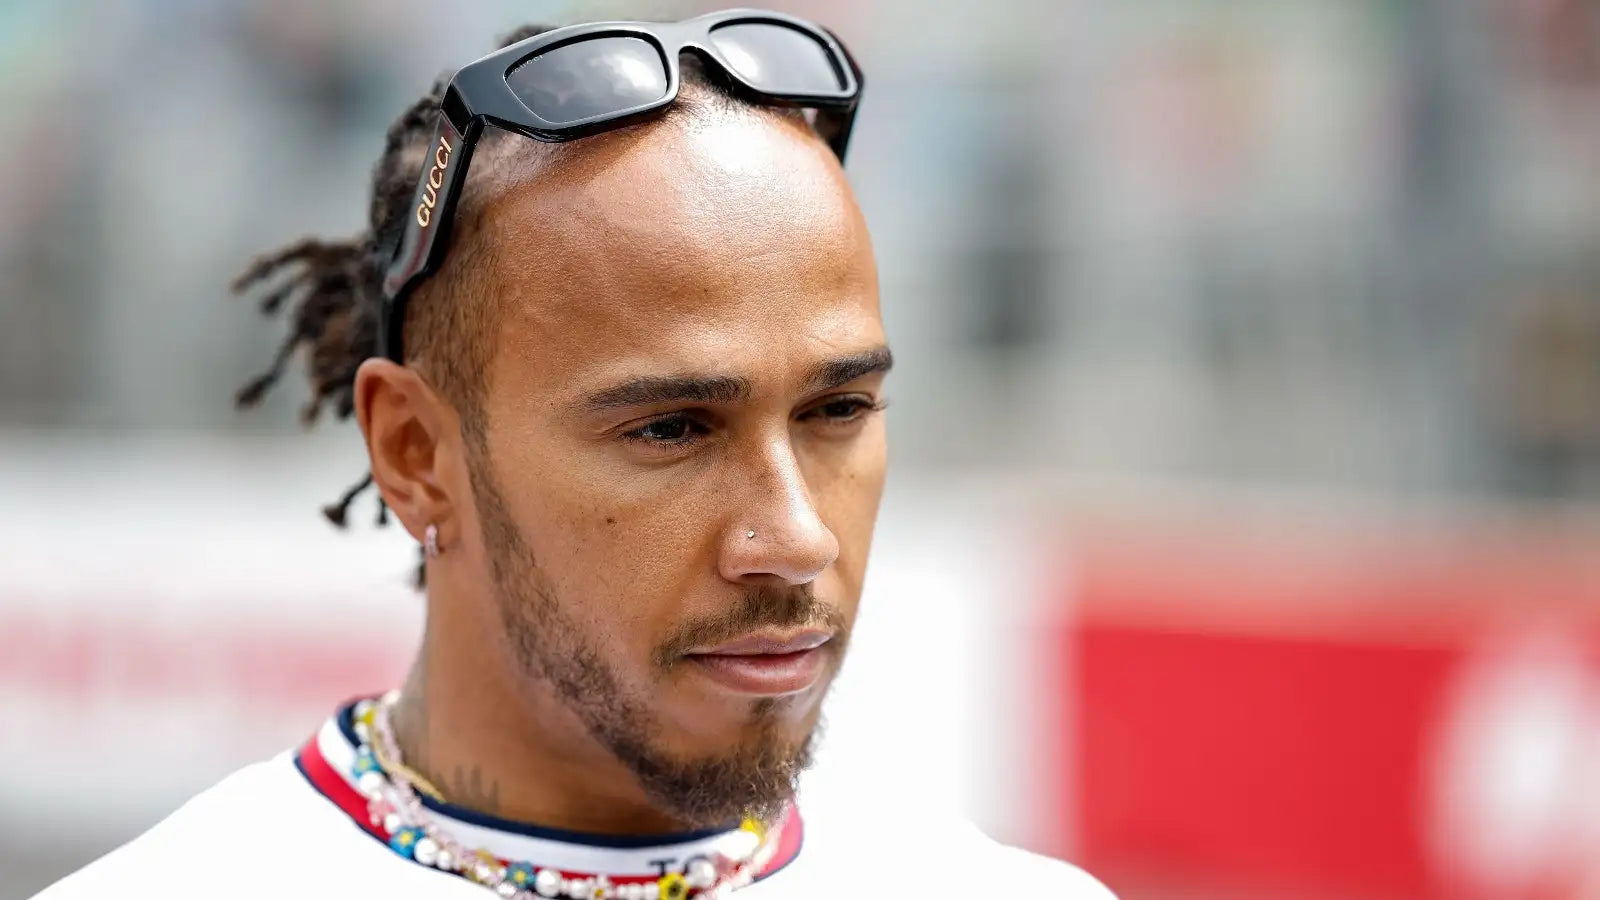 Mercedes warned it could get ‘tetchy’ during Lewis Hamilton’s ‘farewell tour’